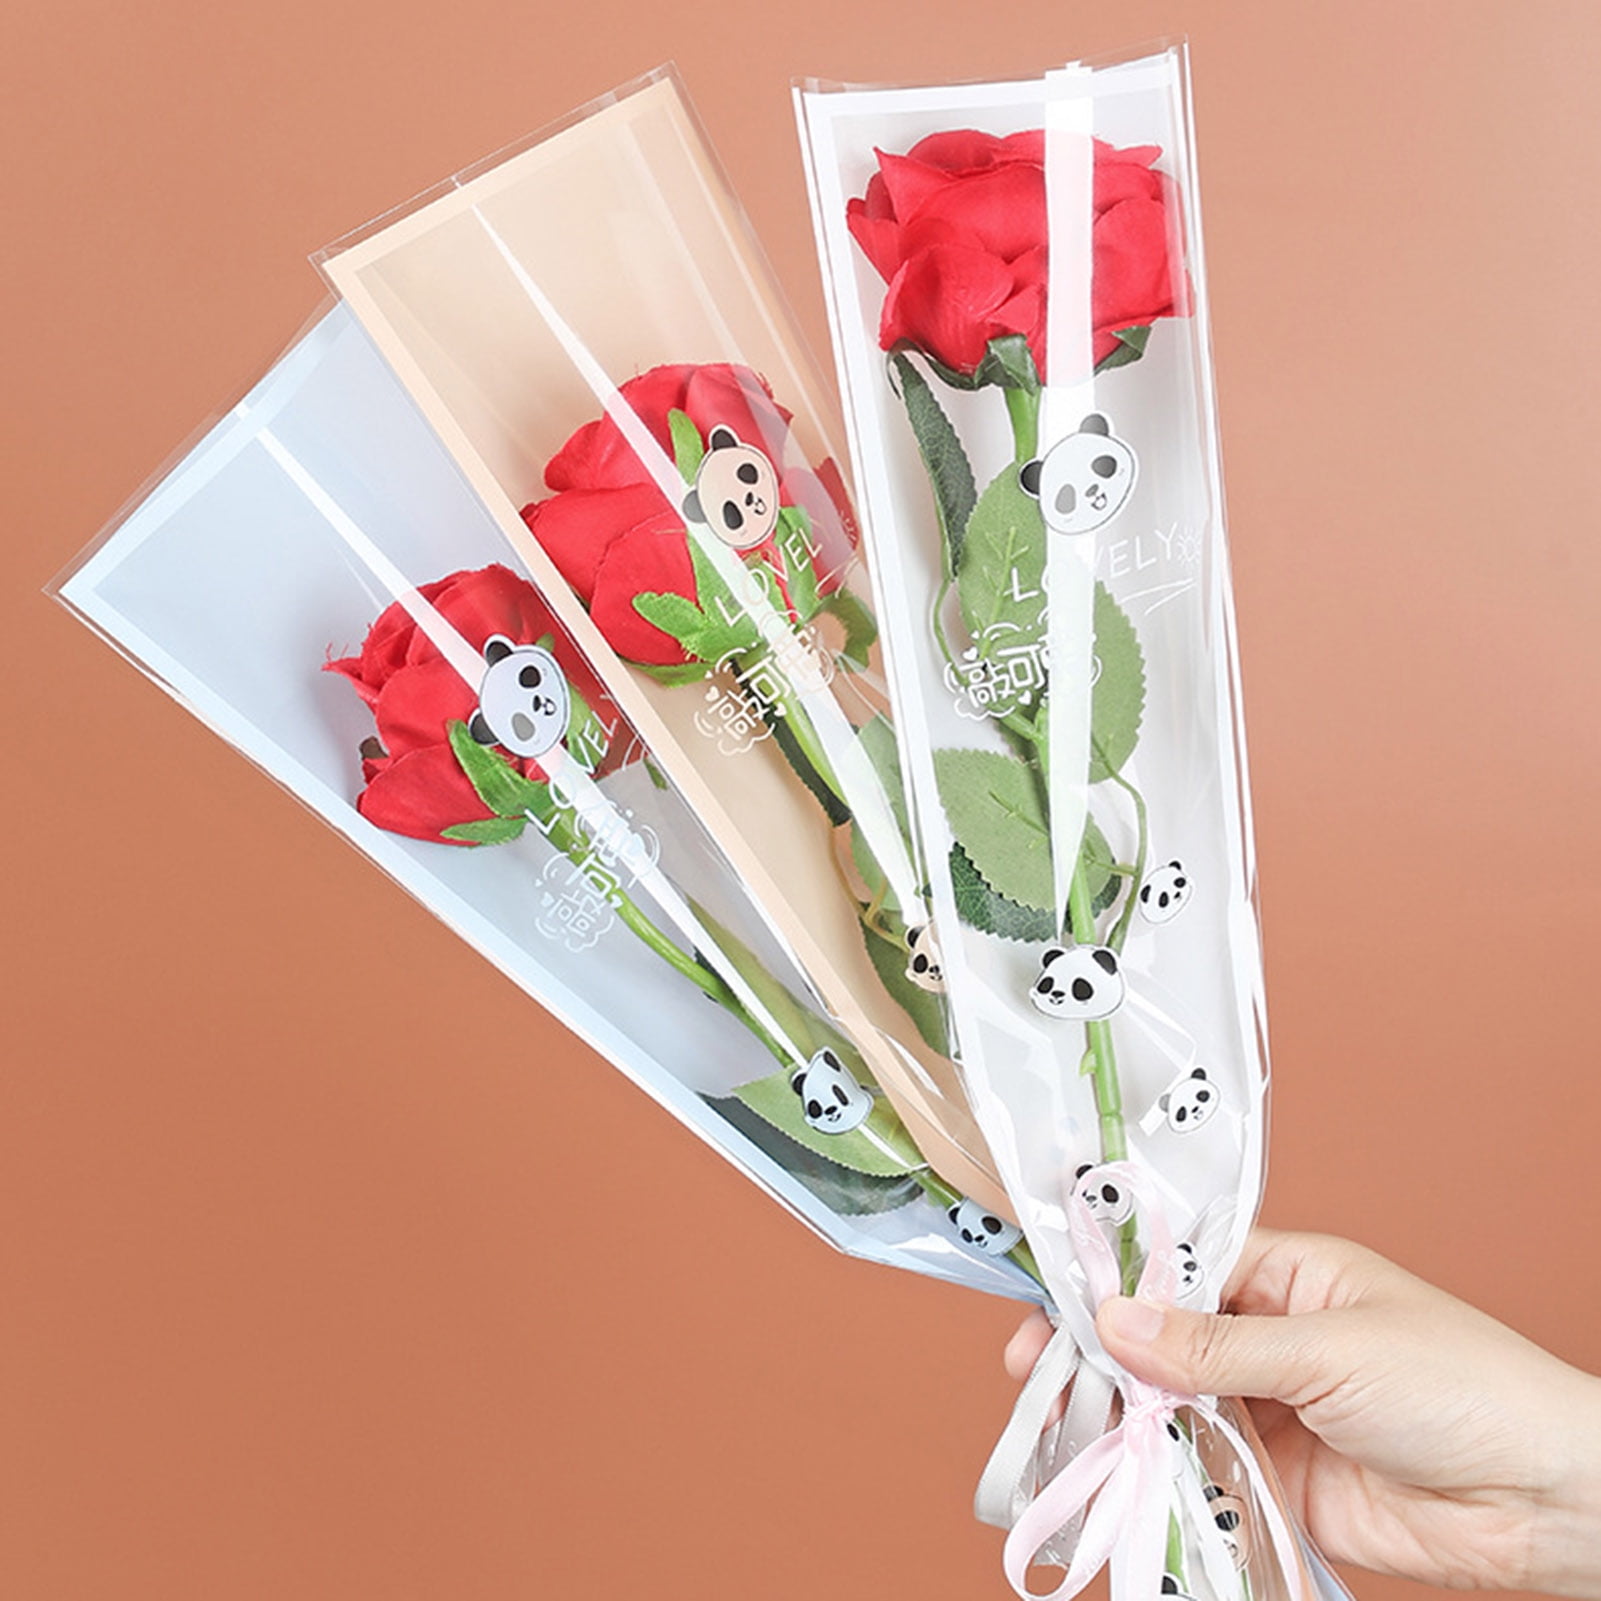 50pcs/bag Single Floral packaging bag,Single Rose Sleeve Carnations Flower  Wrapping Paper,Flower Bouquet Sleeve Bag - AliExpress